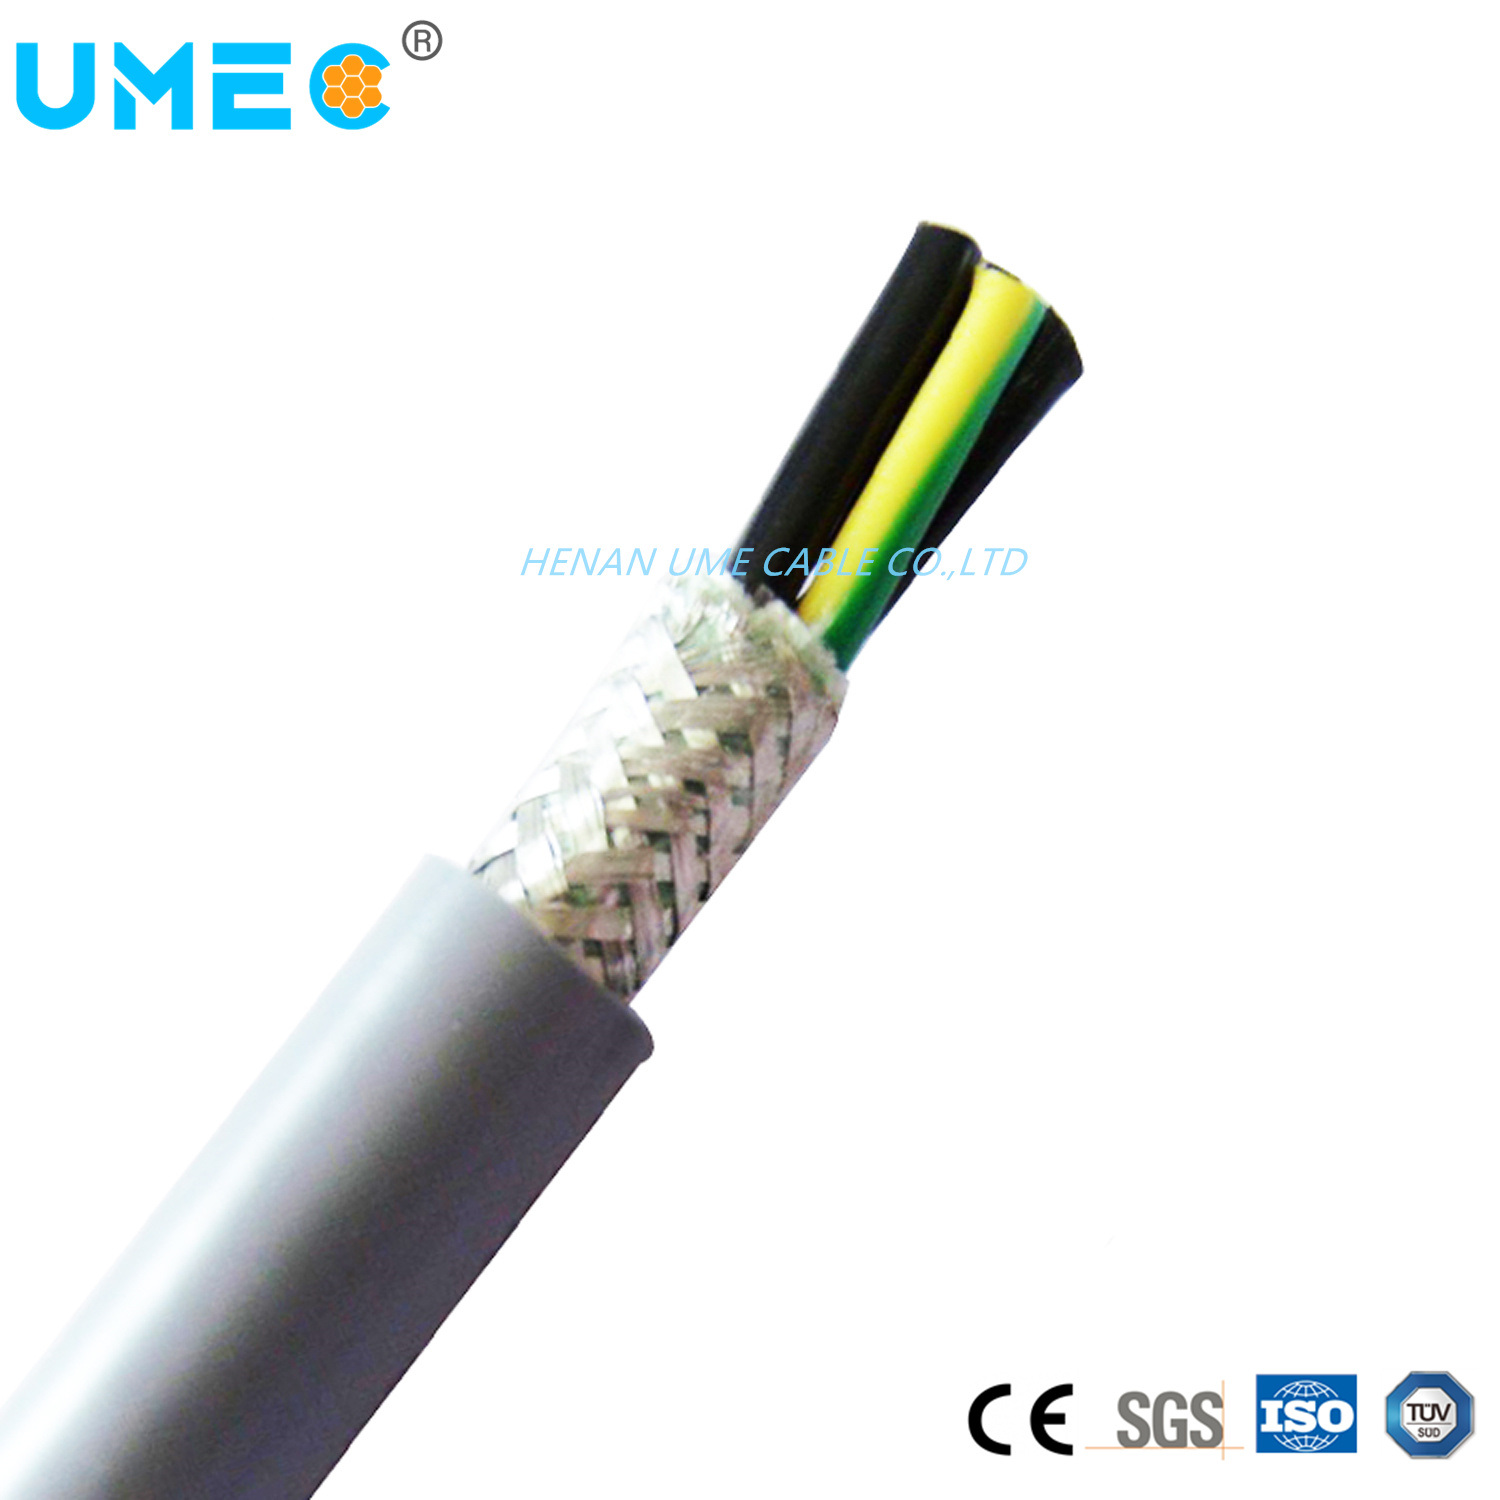 Utility Copper Conductor PVC Insulated and Sheathed Braiding Shielded Control Cable